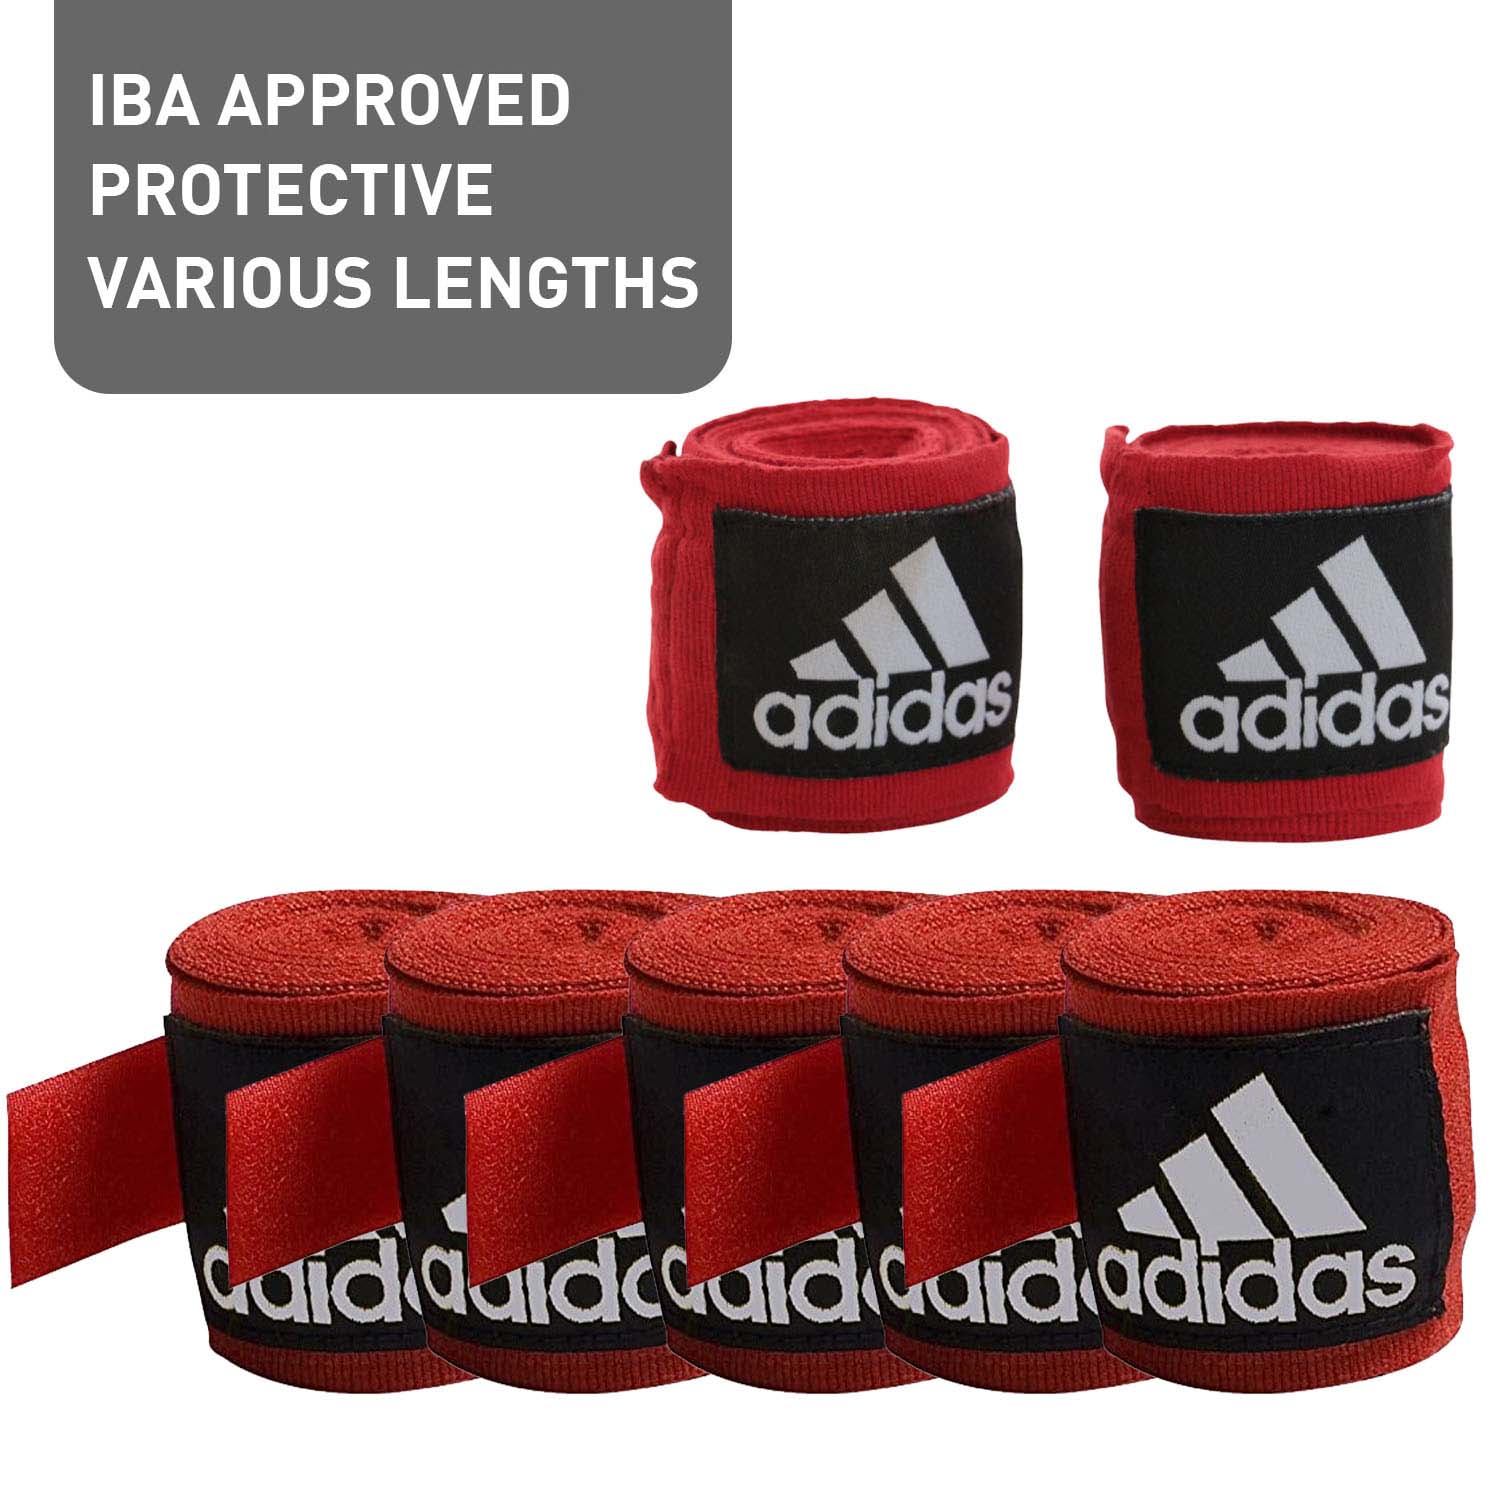 adidas IBA Approved Protective Boxing Hand Wraps – Pack of 5 pairs Bundle Deal